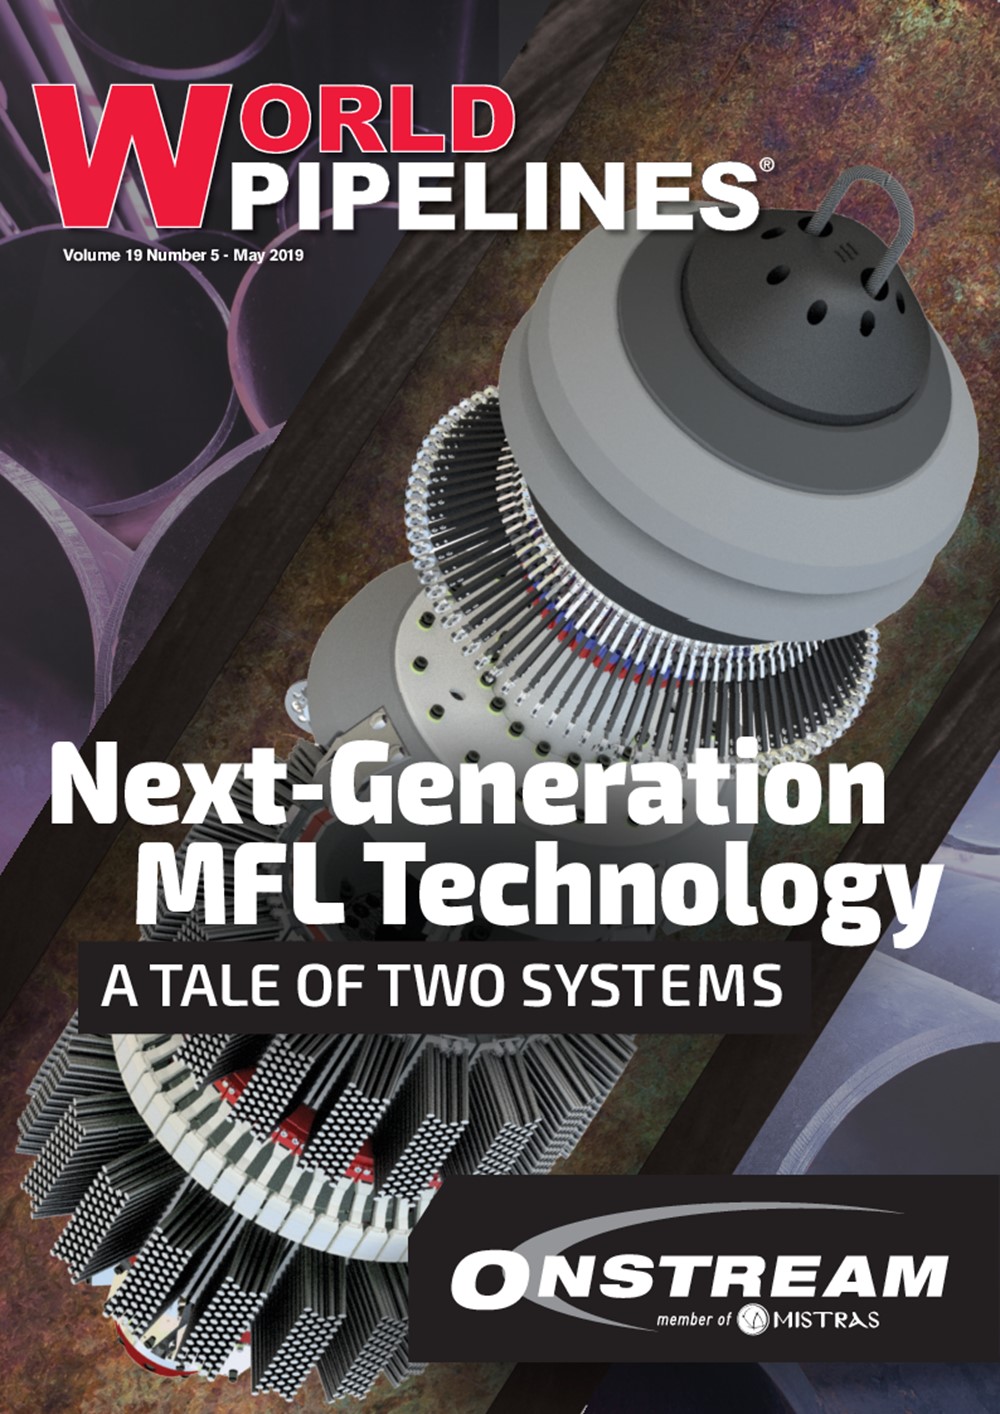 Next-Generation MFL Technology: A Tale of Two Systems